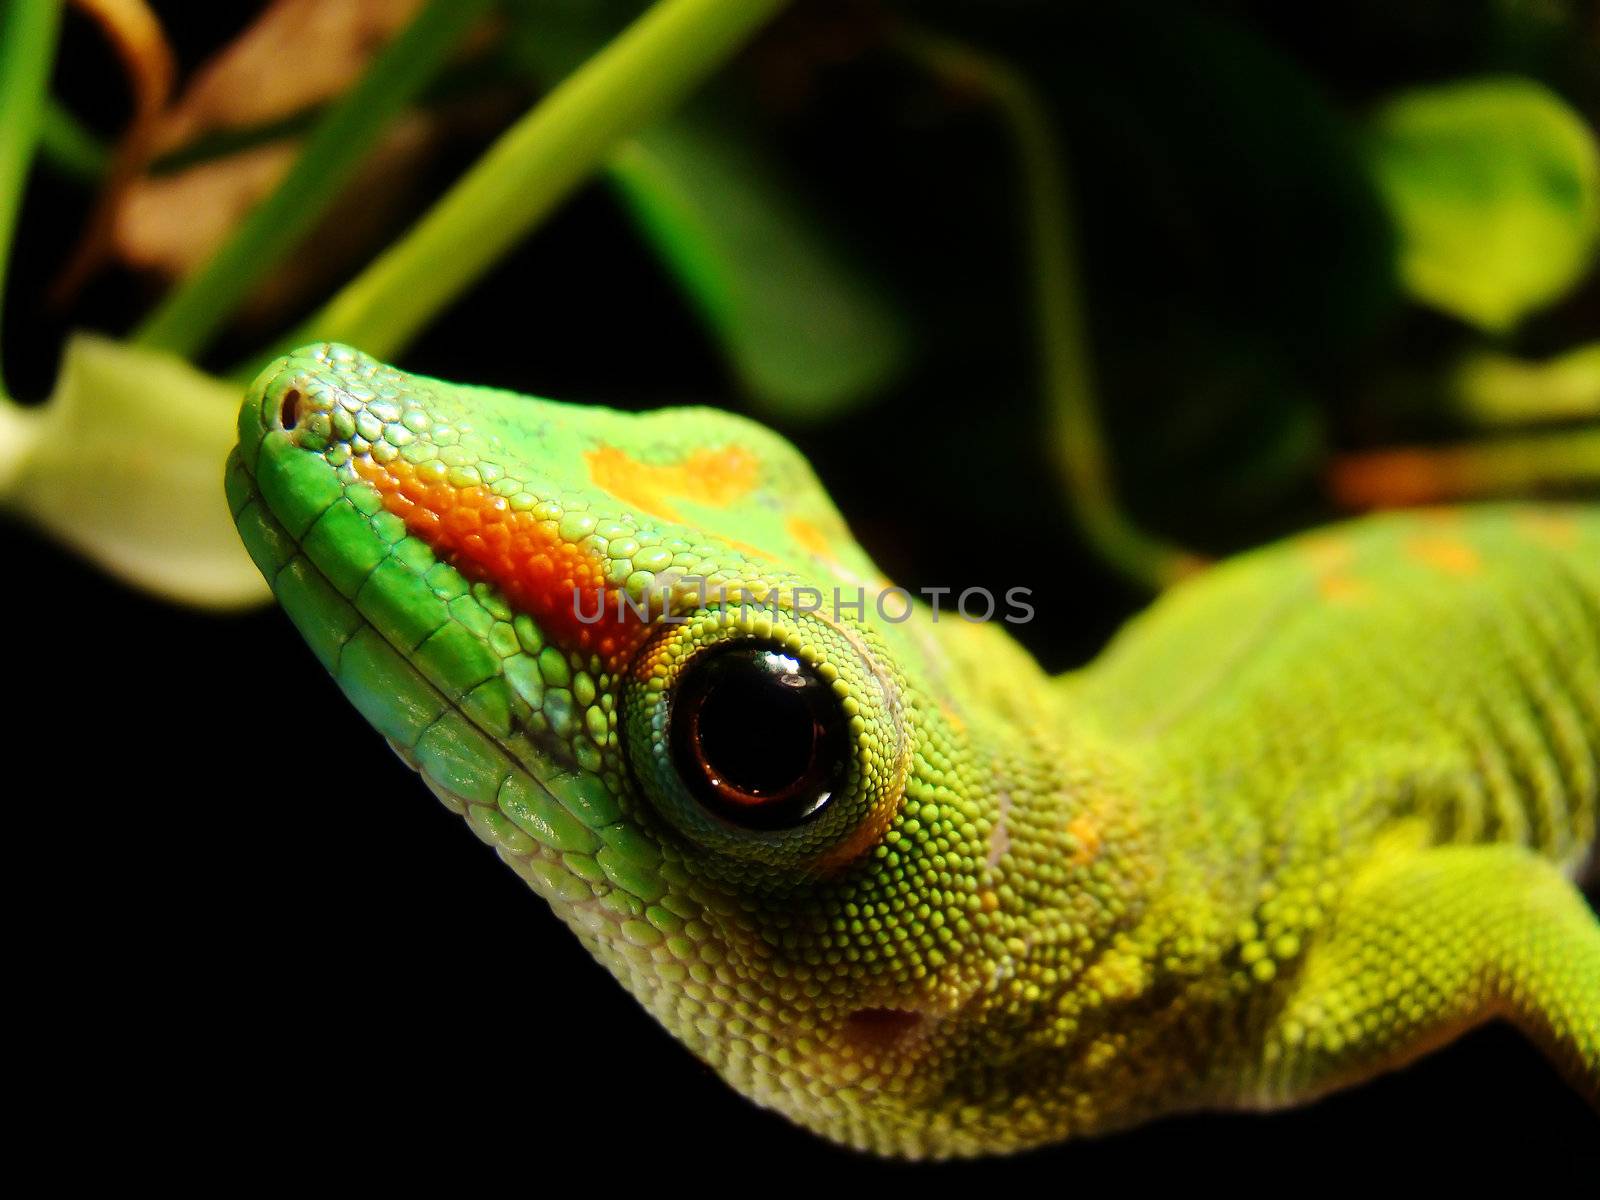 madagascar giant day gecko hangs out in his tank